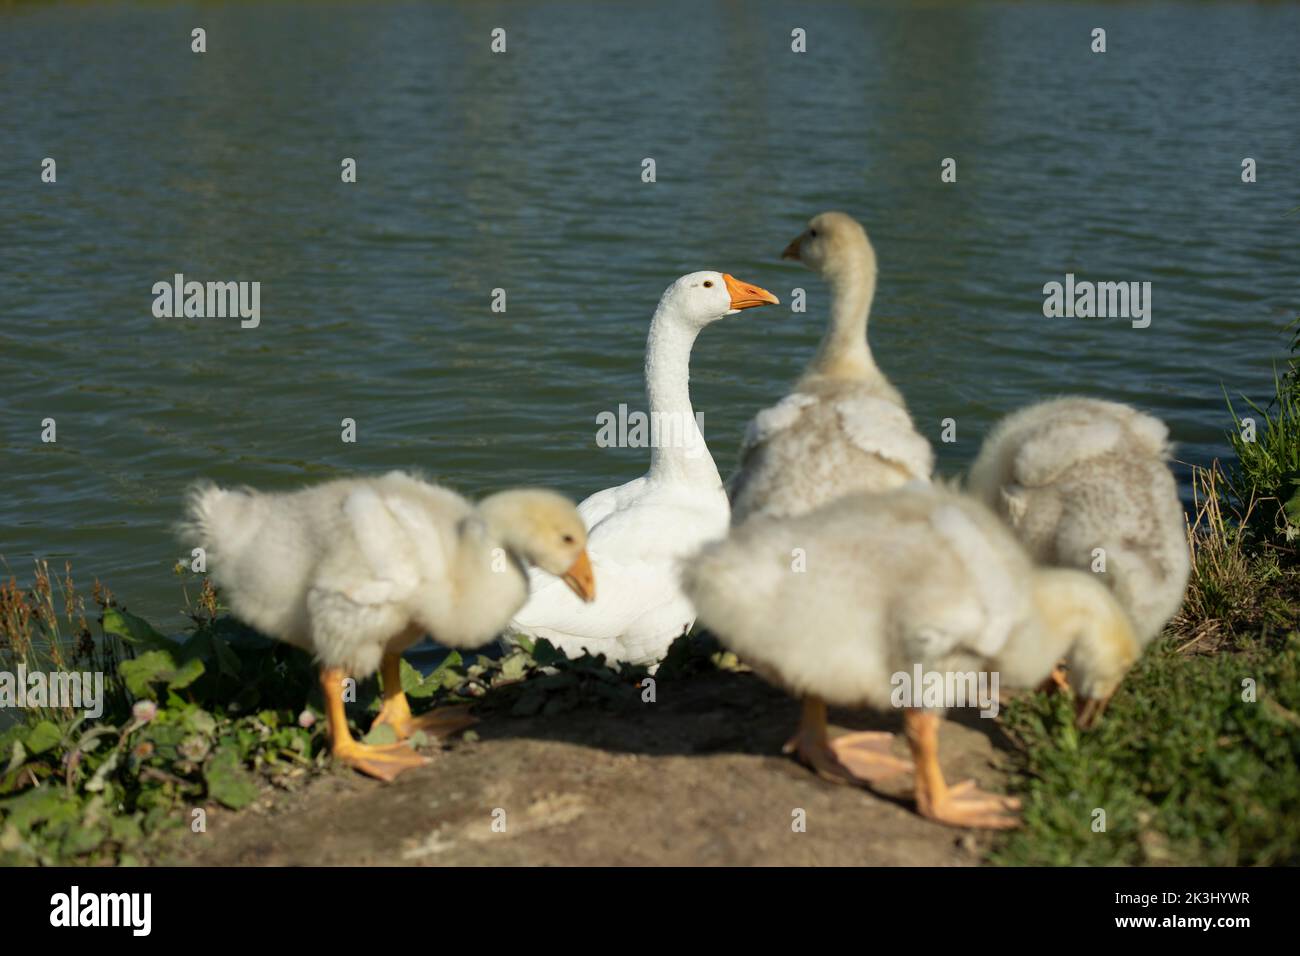 Geese on farm. Goose family in summer. Water birds on shore of pond. Family of birds. Stock Photo